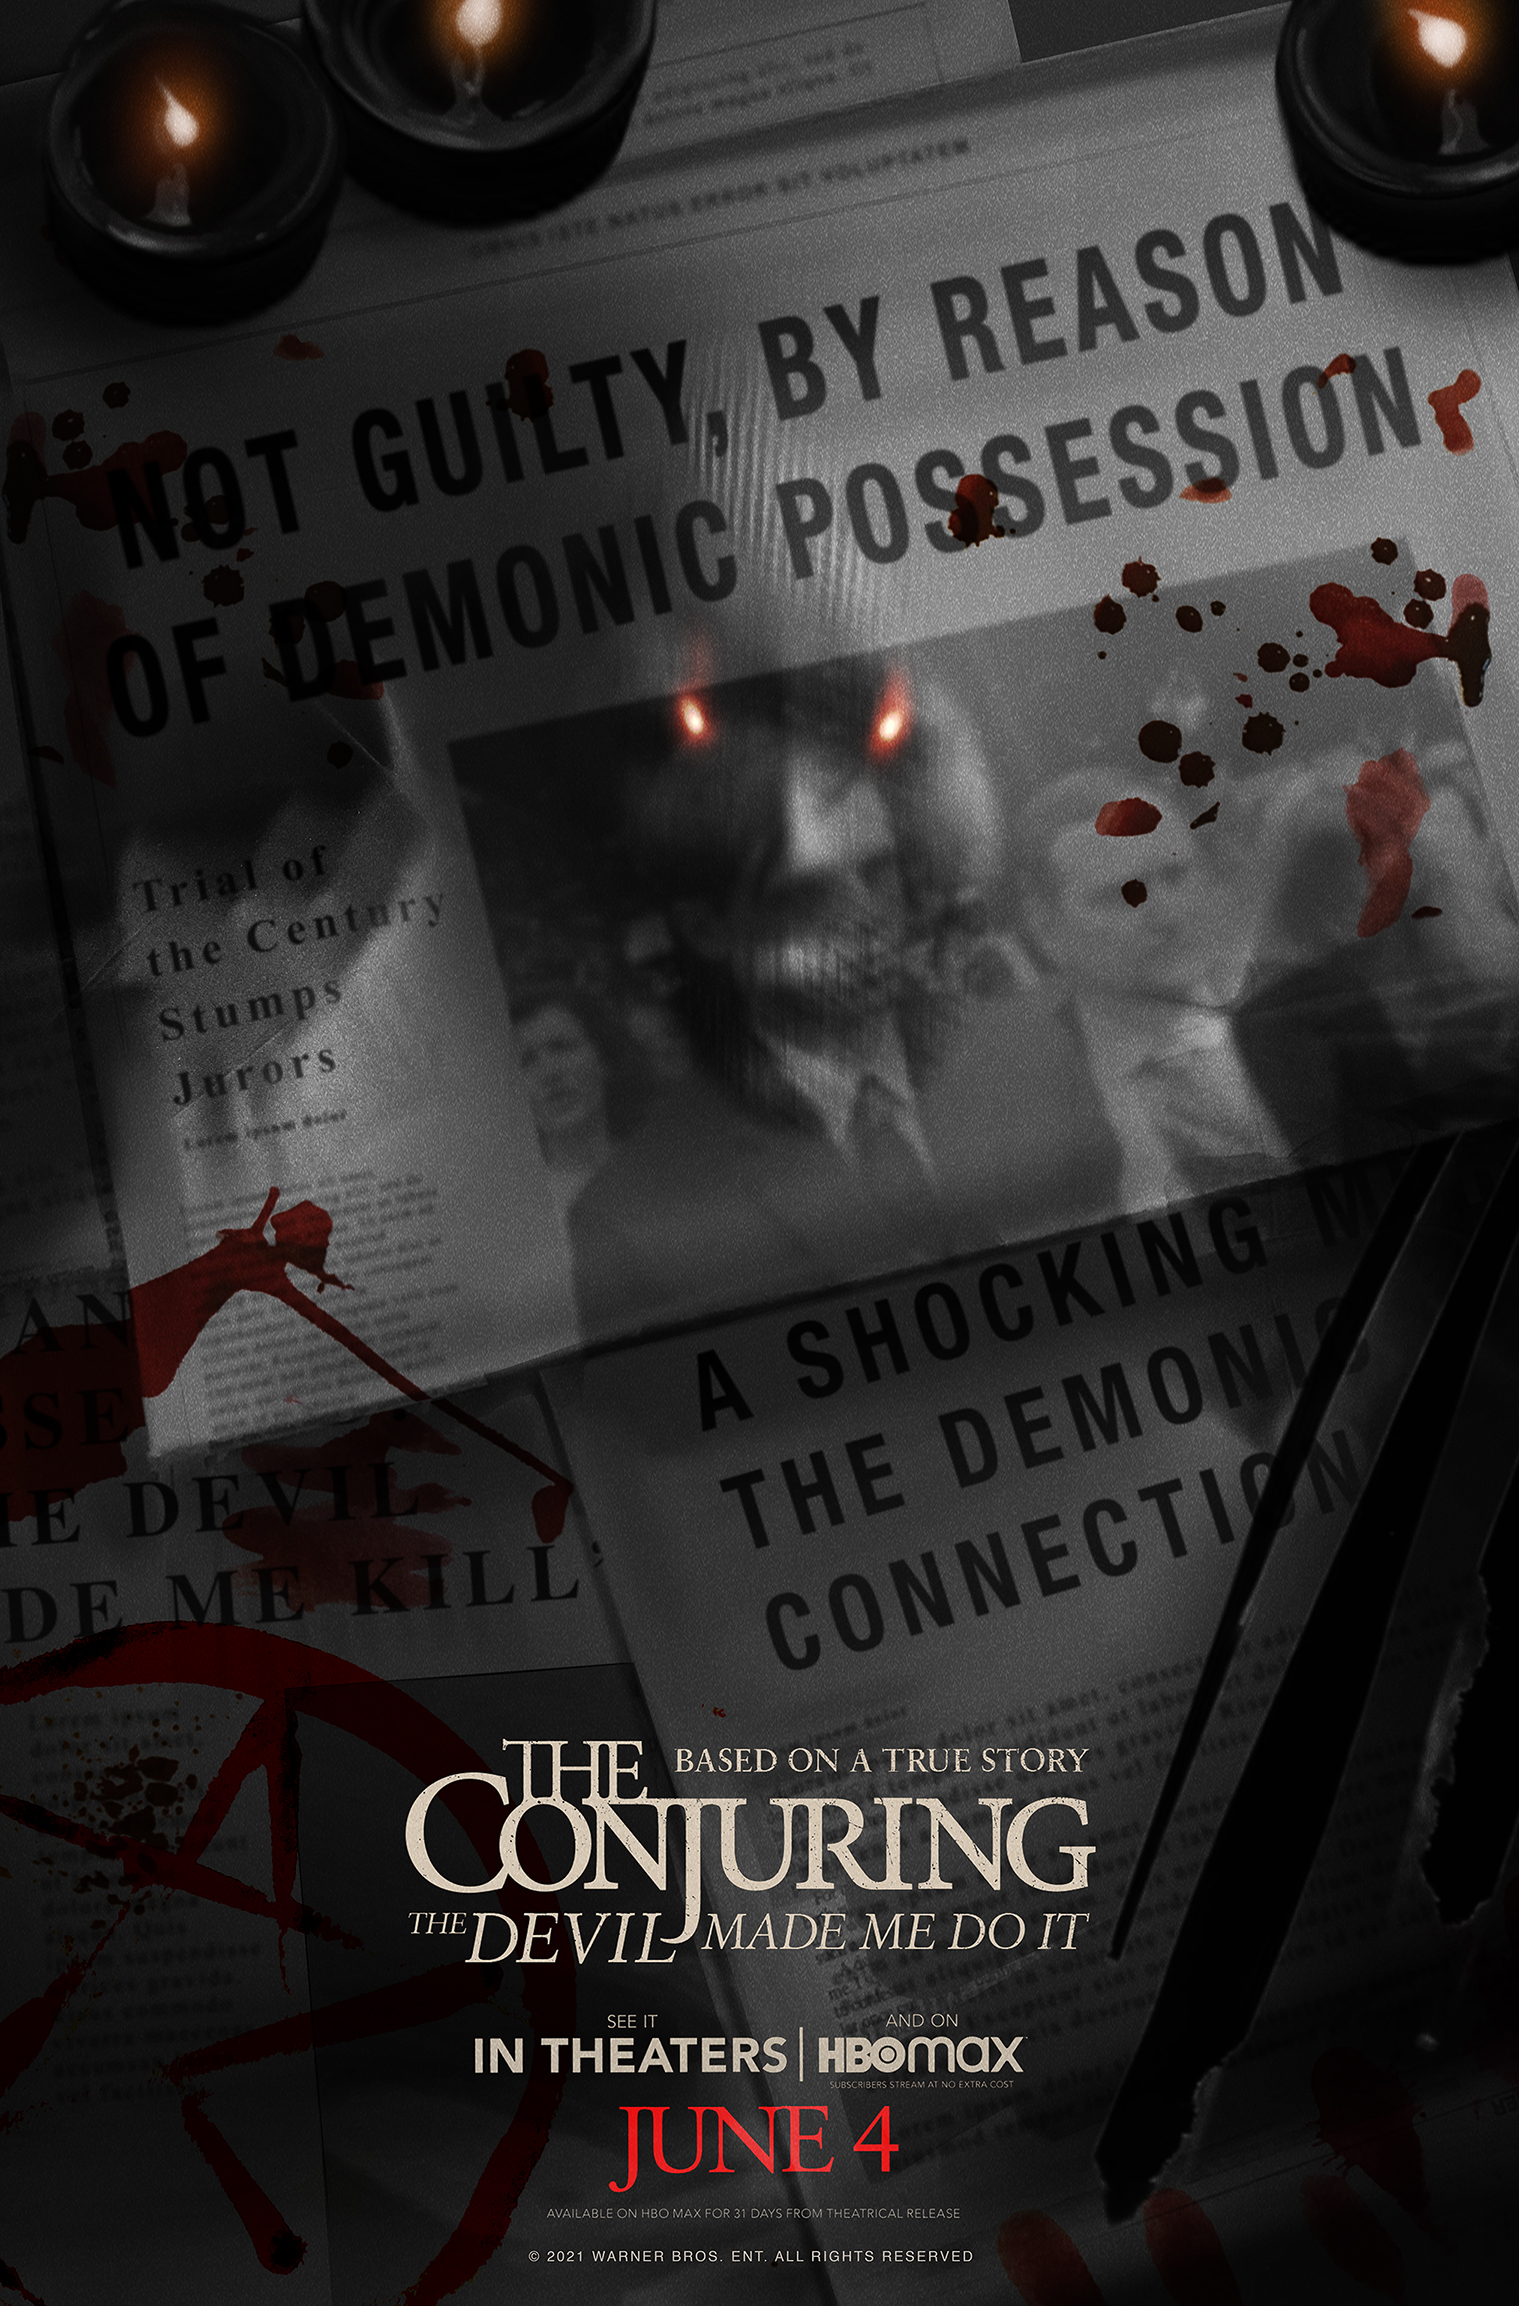 Artwork by Conjuring:  The Devil Made Me Do It